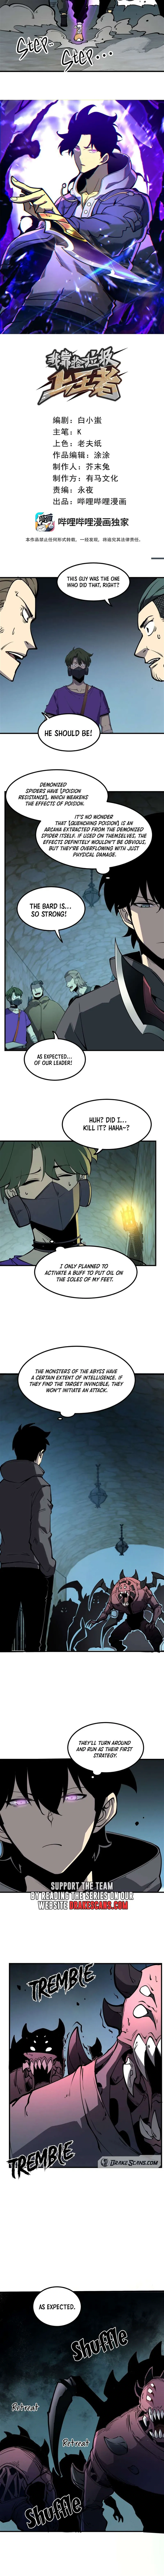 I Became The King by Scavenging Chapter 13 page 3